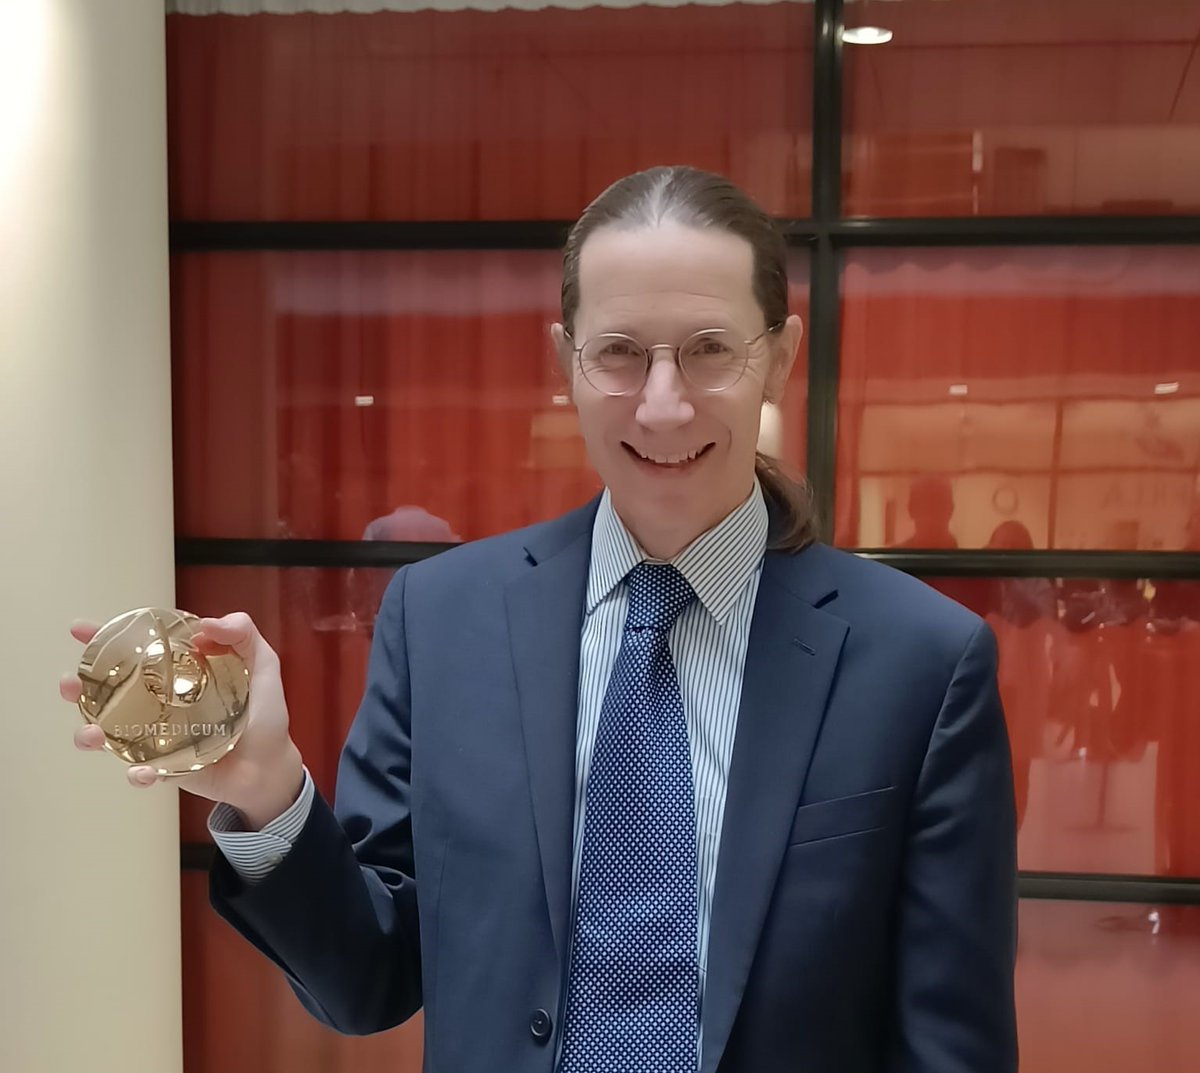 Our heartfelt congratulations to FIMM director @dalygene for being awarded the Biomedicum Helsinki Medal and for giving a great Biomedicum Helsinki Lecture 2022: ”Human Genetics in Finland: past, present, and future” today. https://t.co/zjh4MqS4oJ